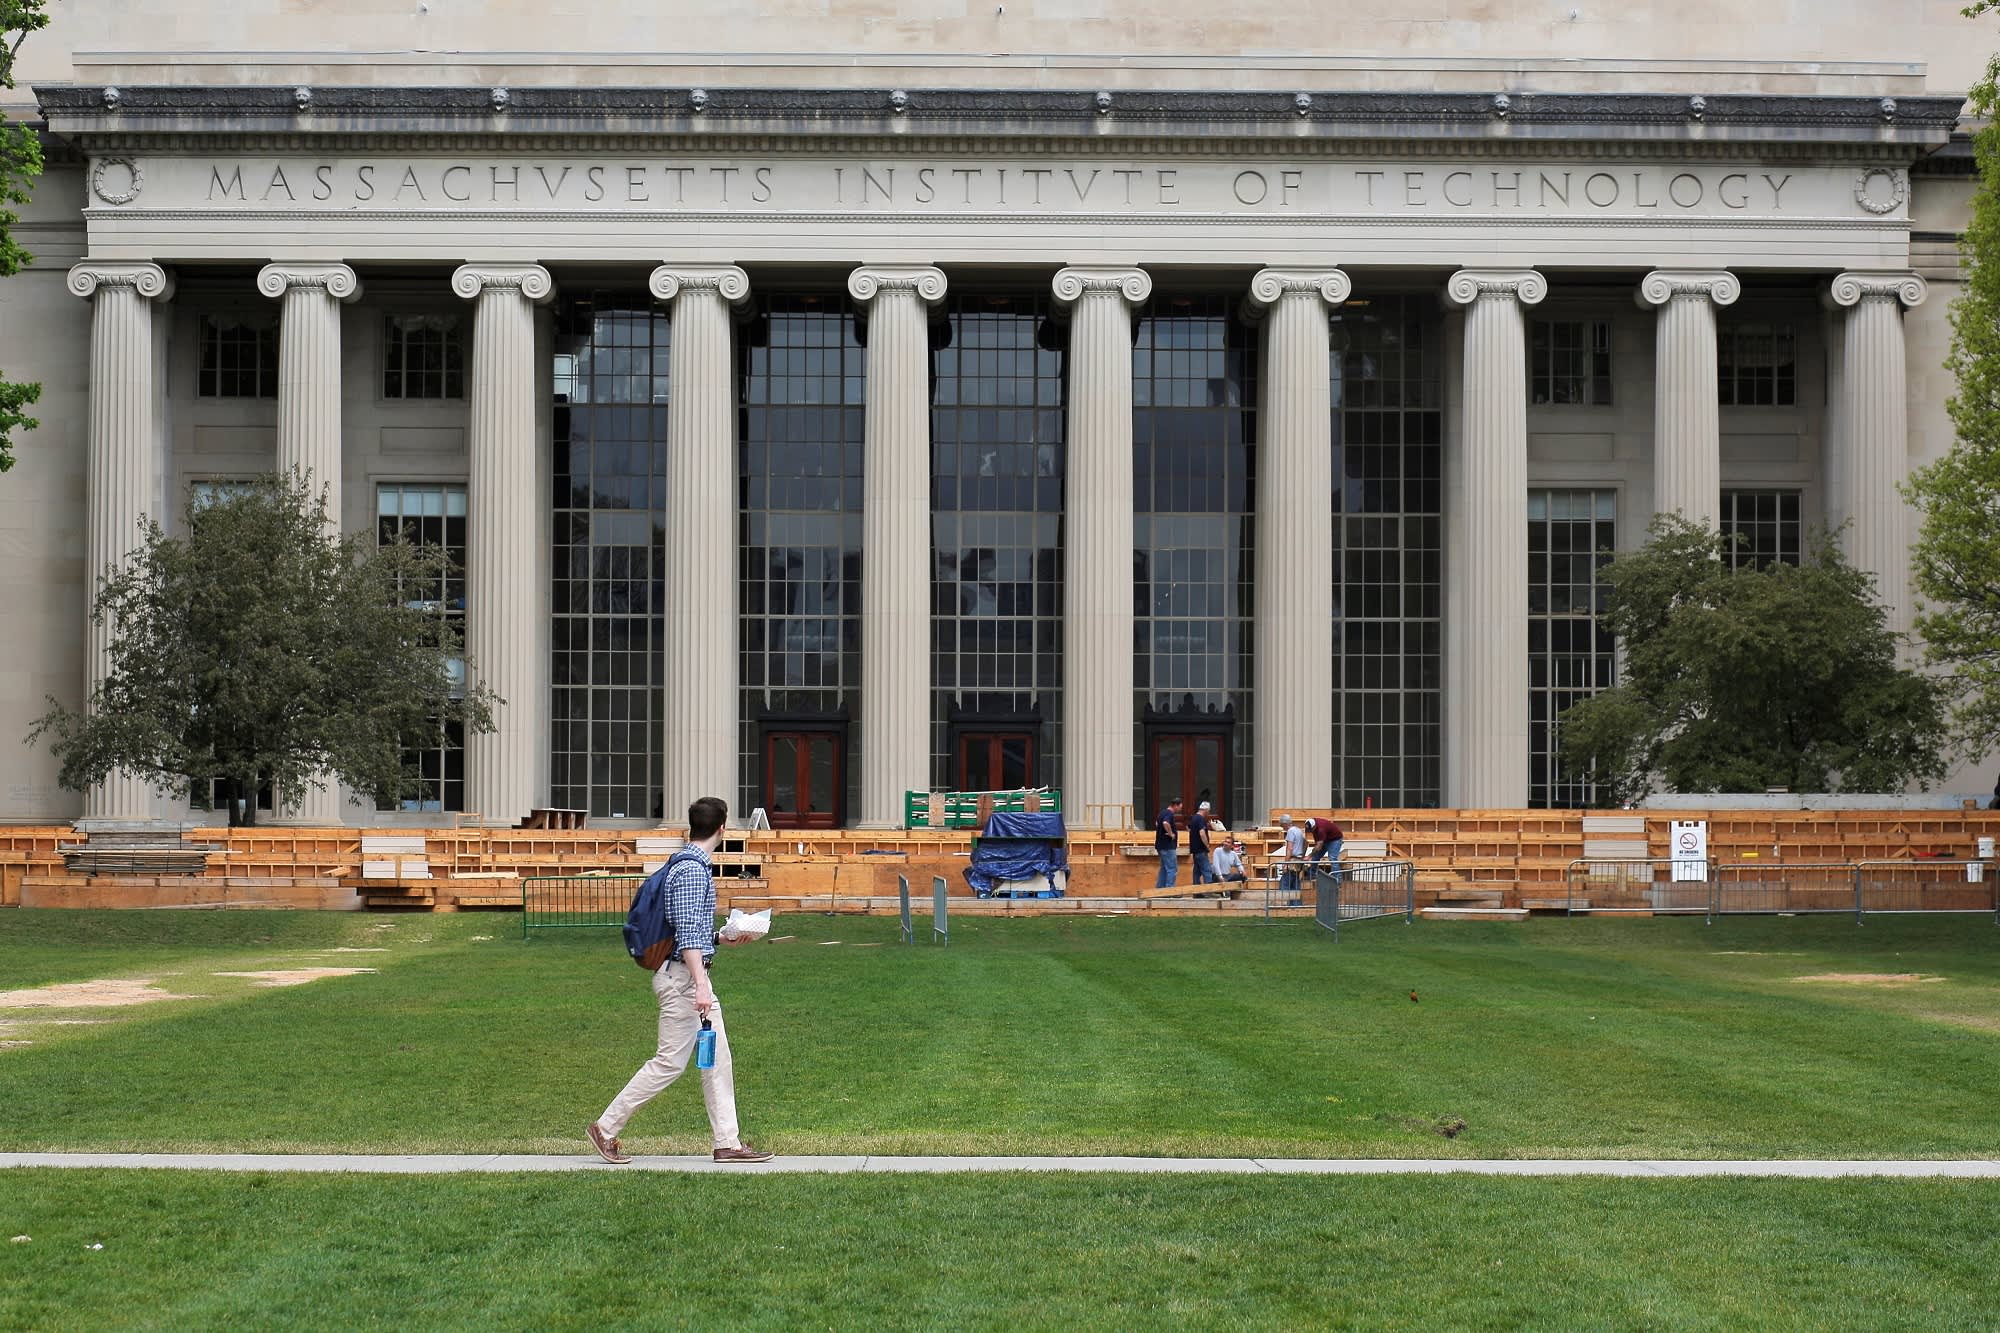 Why choosing between a public or private college based on tuition can be a mistake